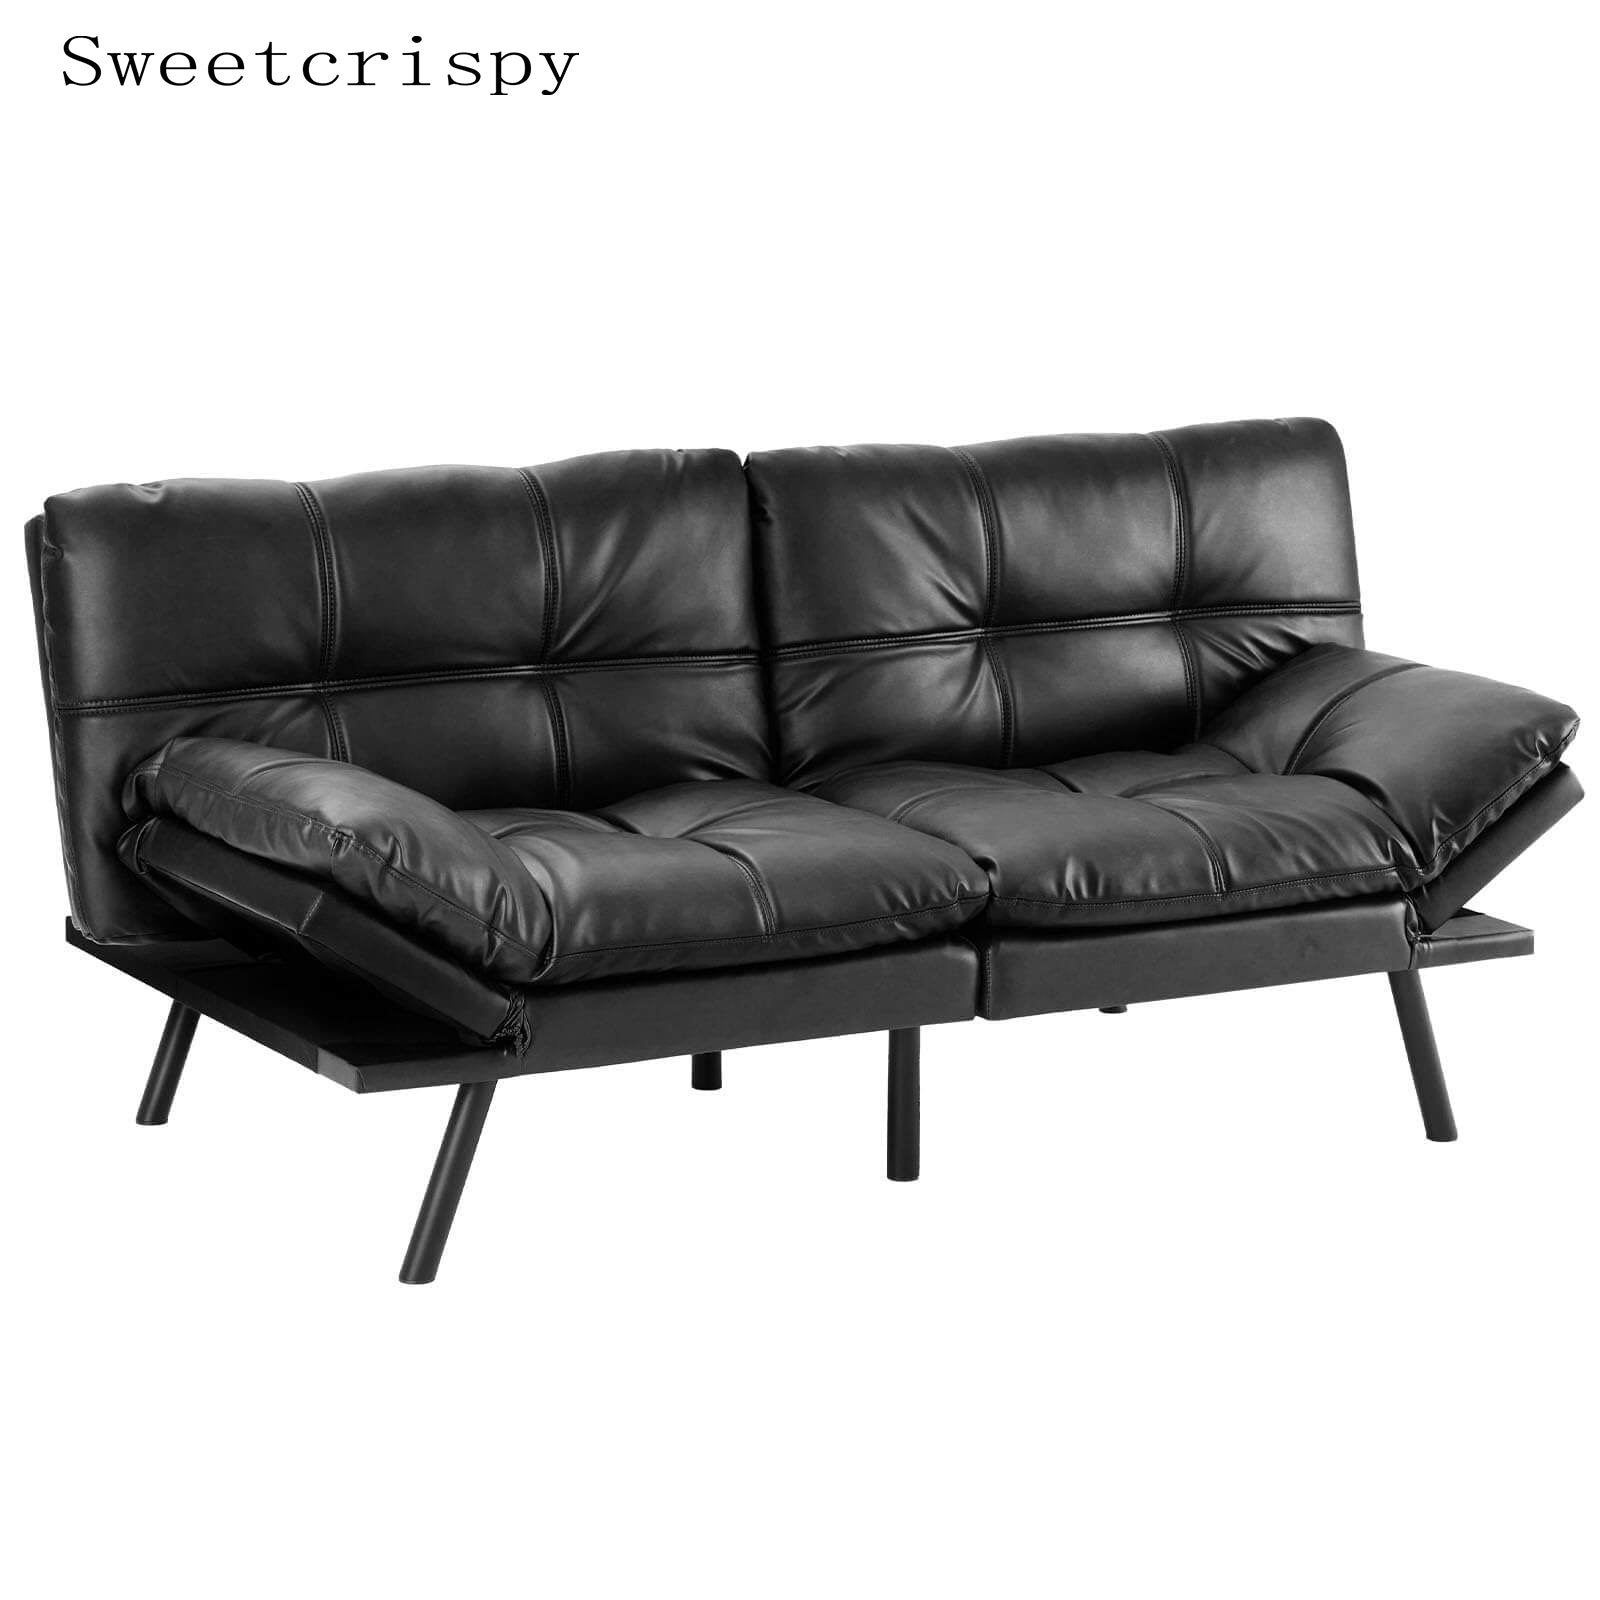 Sweetcrispy Futon Sofa Bed Sofá Cama para Sala Futon Couch Bed Sofas  Sleeper, Modern Convertible Faux Leather Futon for Living Room, Small  Loveseat